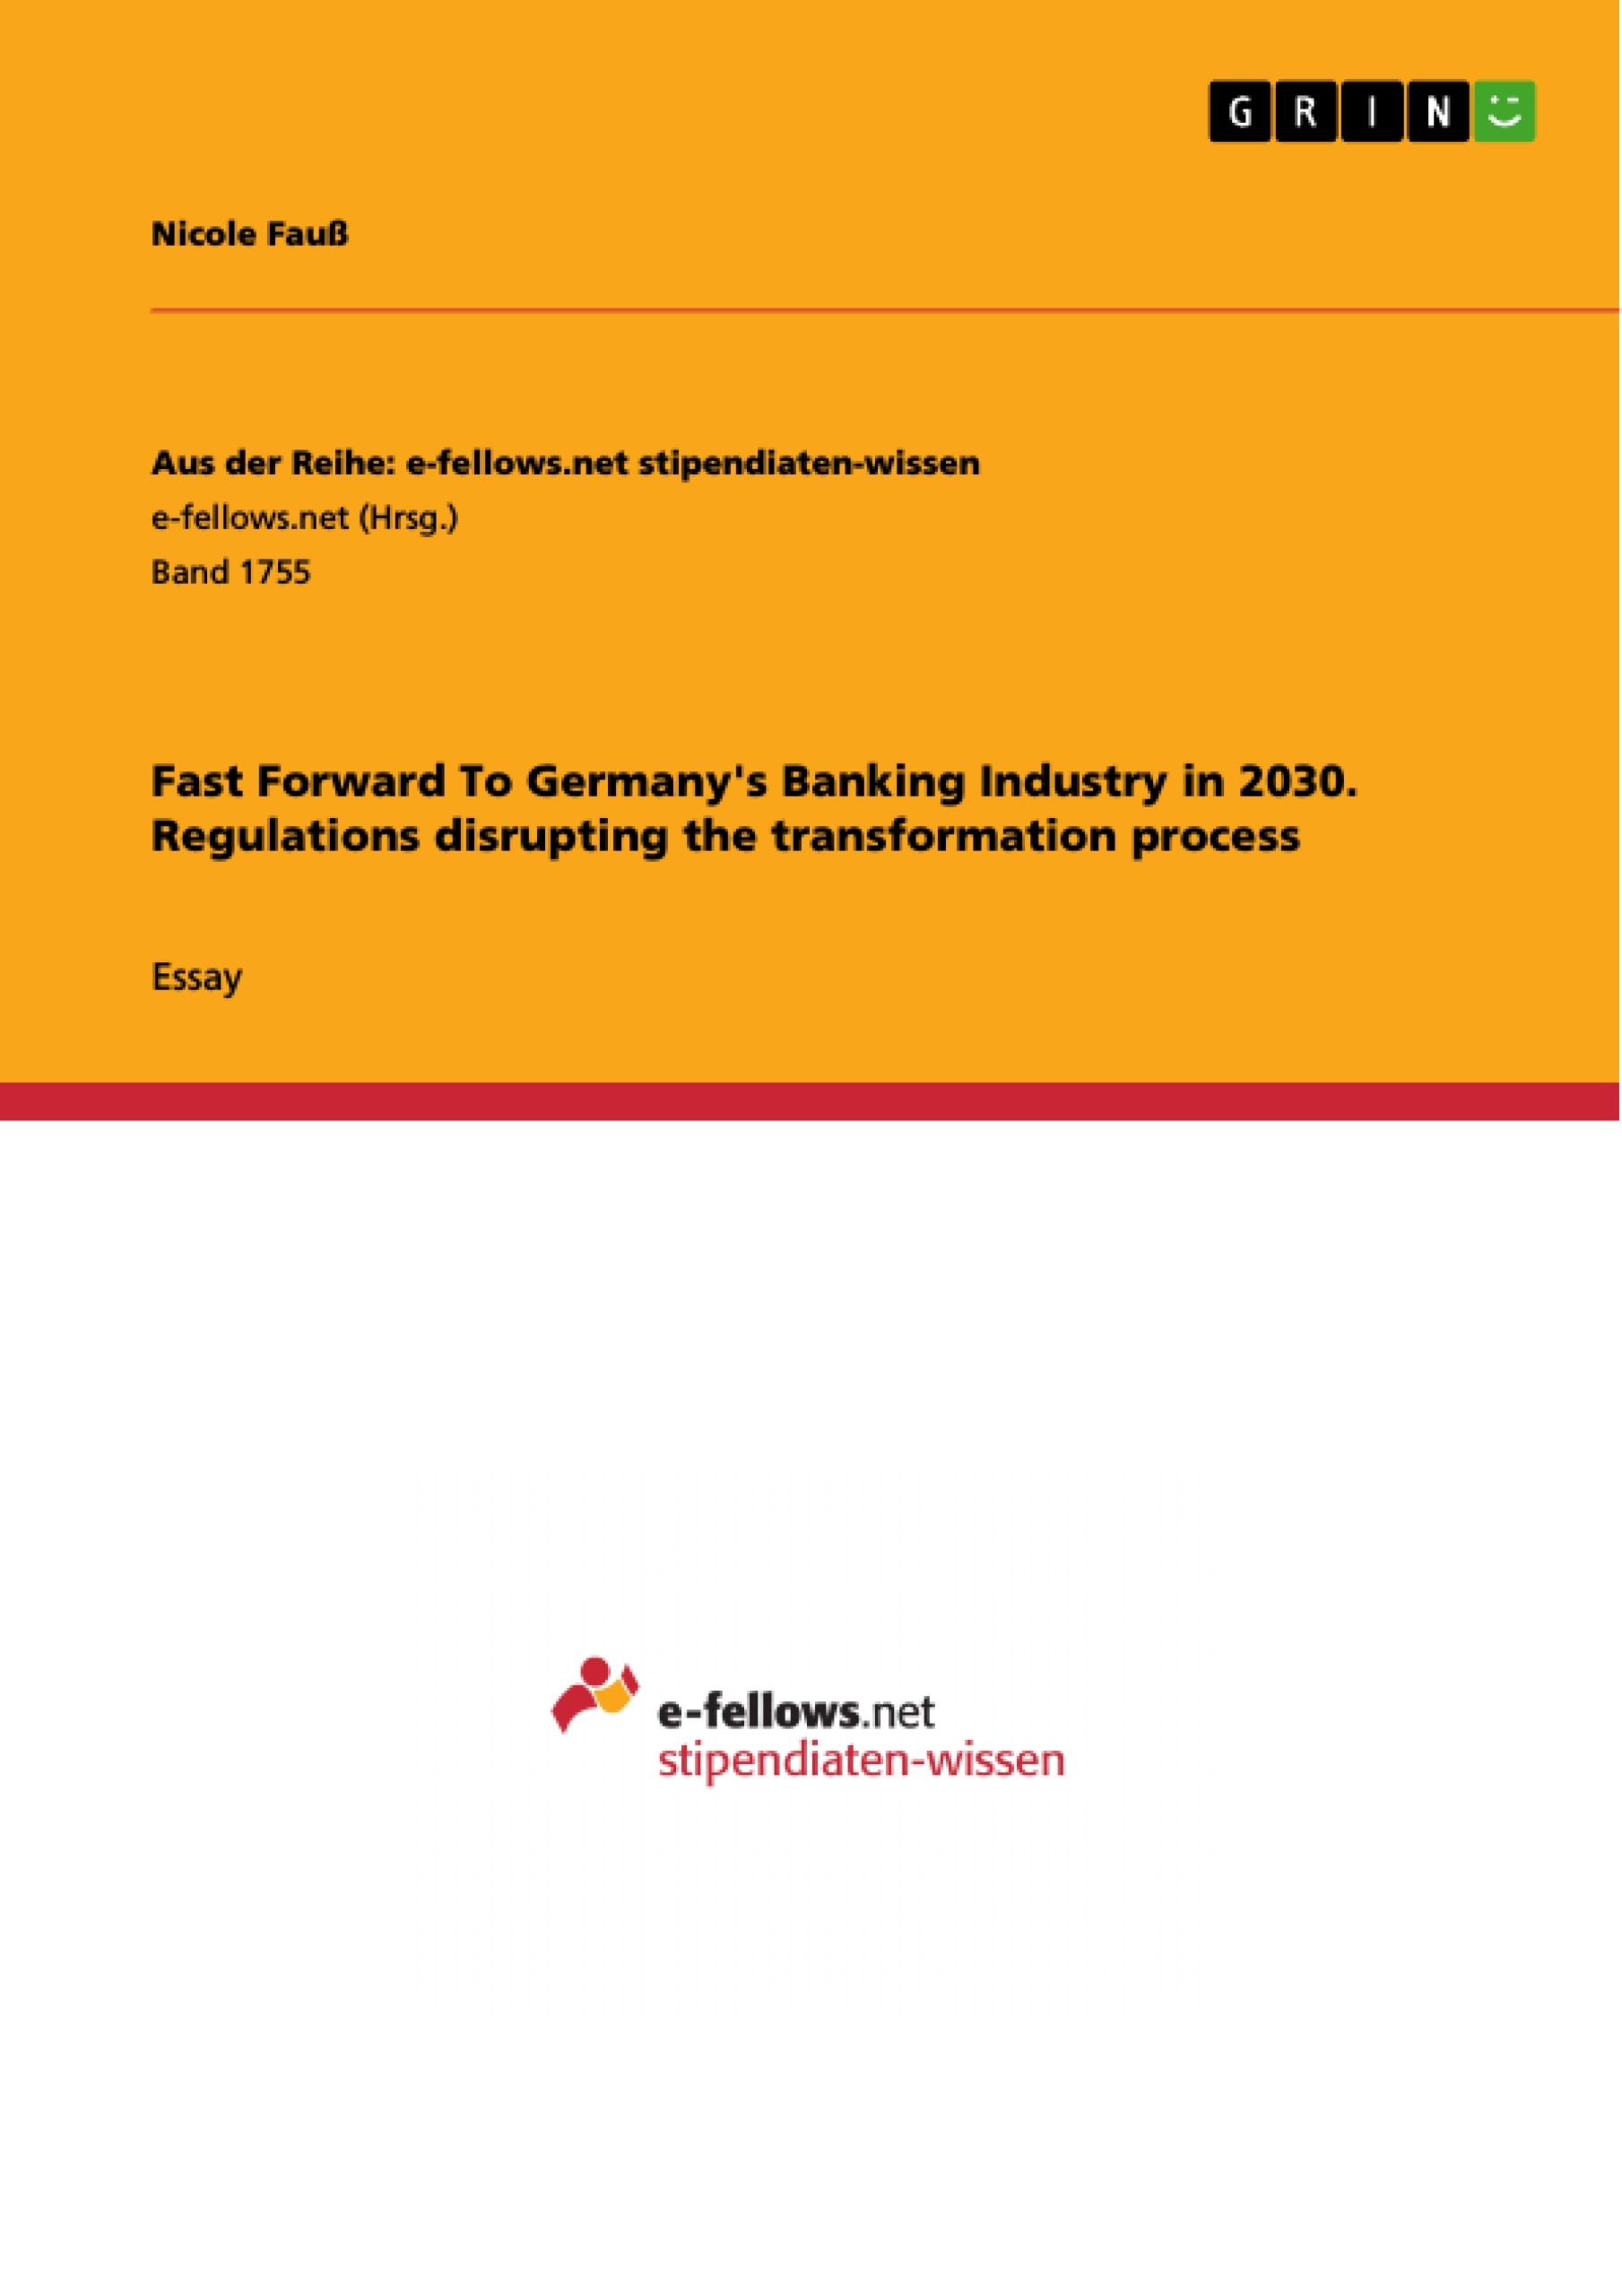 Title: Fast Forward To Germany's Banking Industry in 2030. Regulations disrupting the transformation process